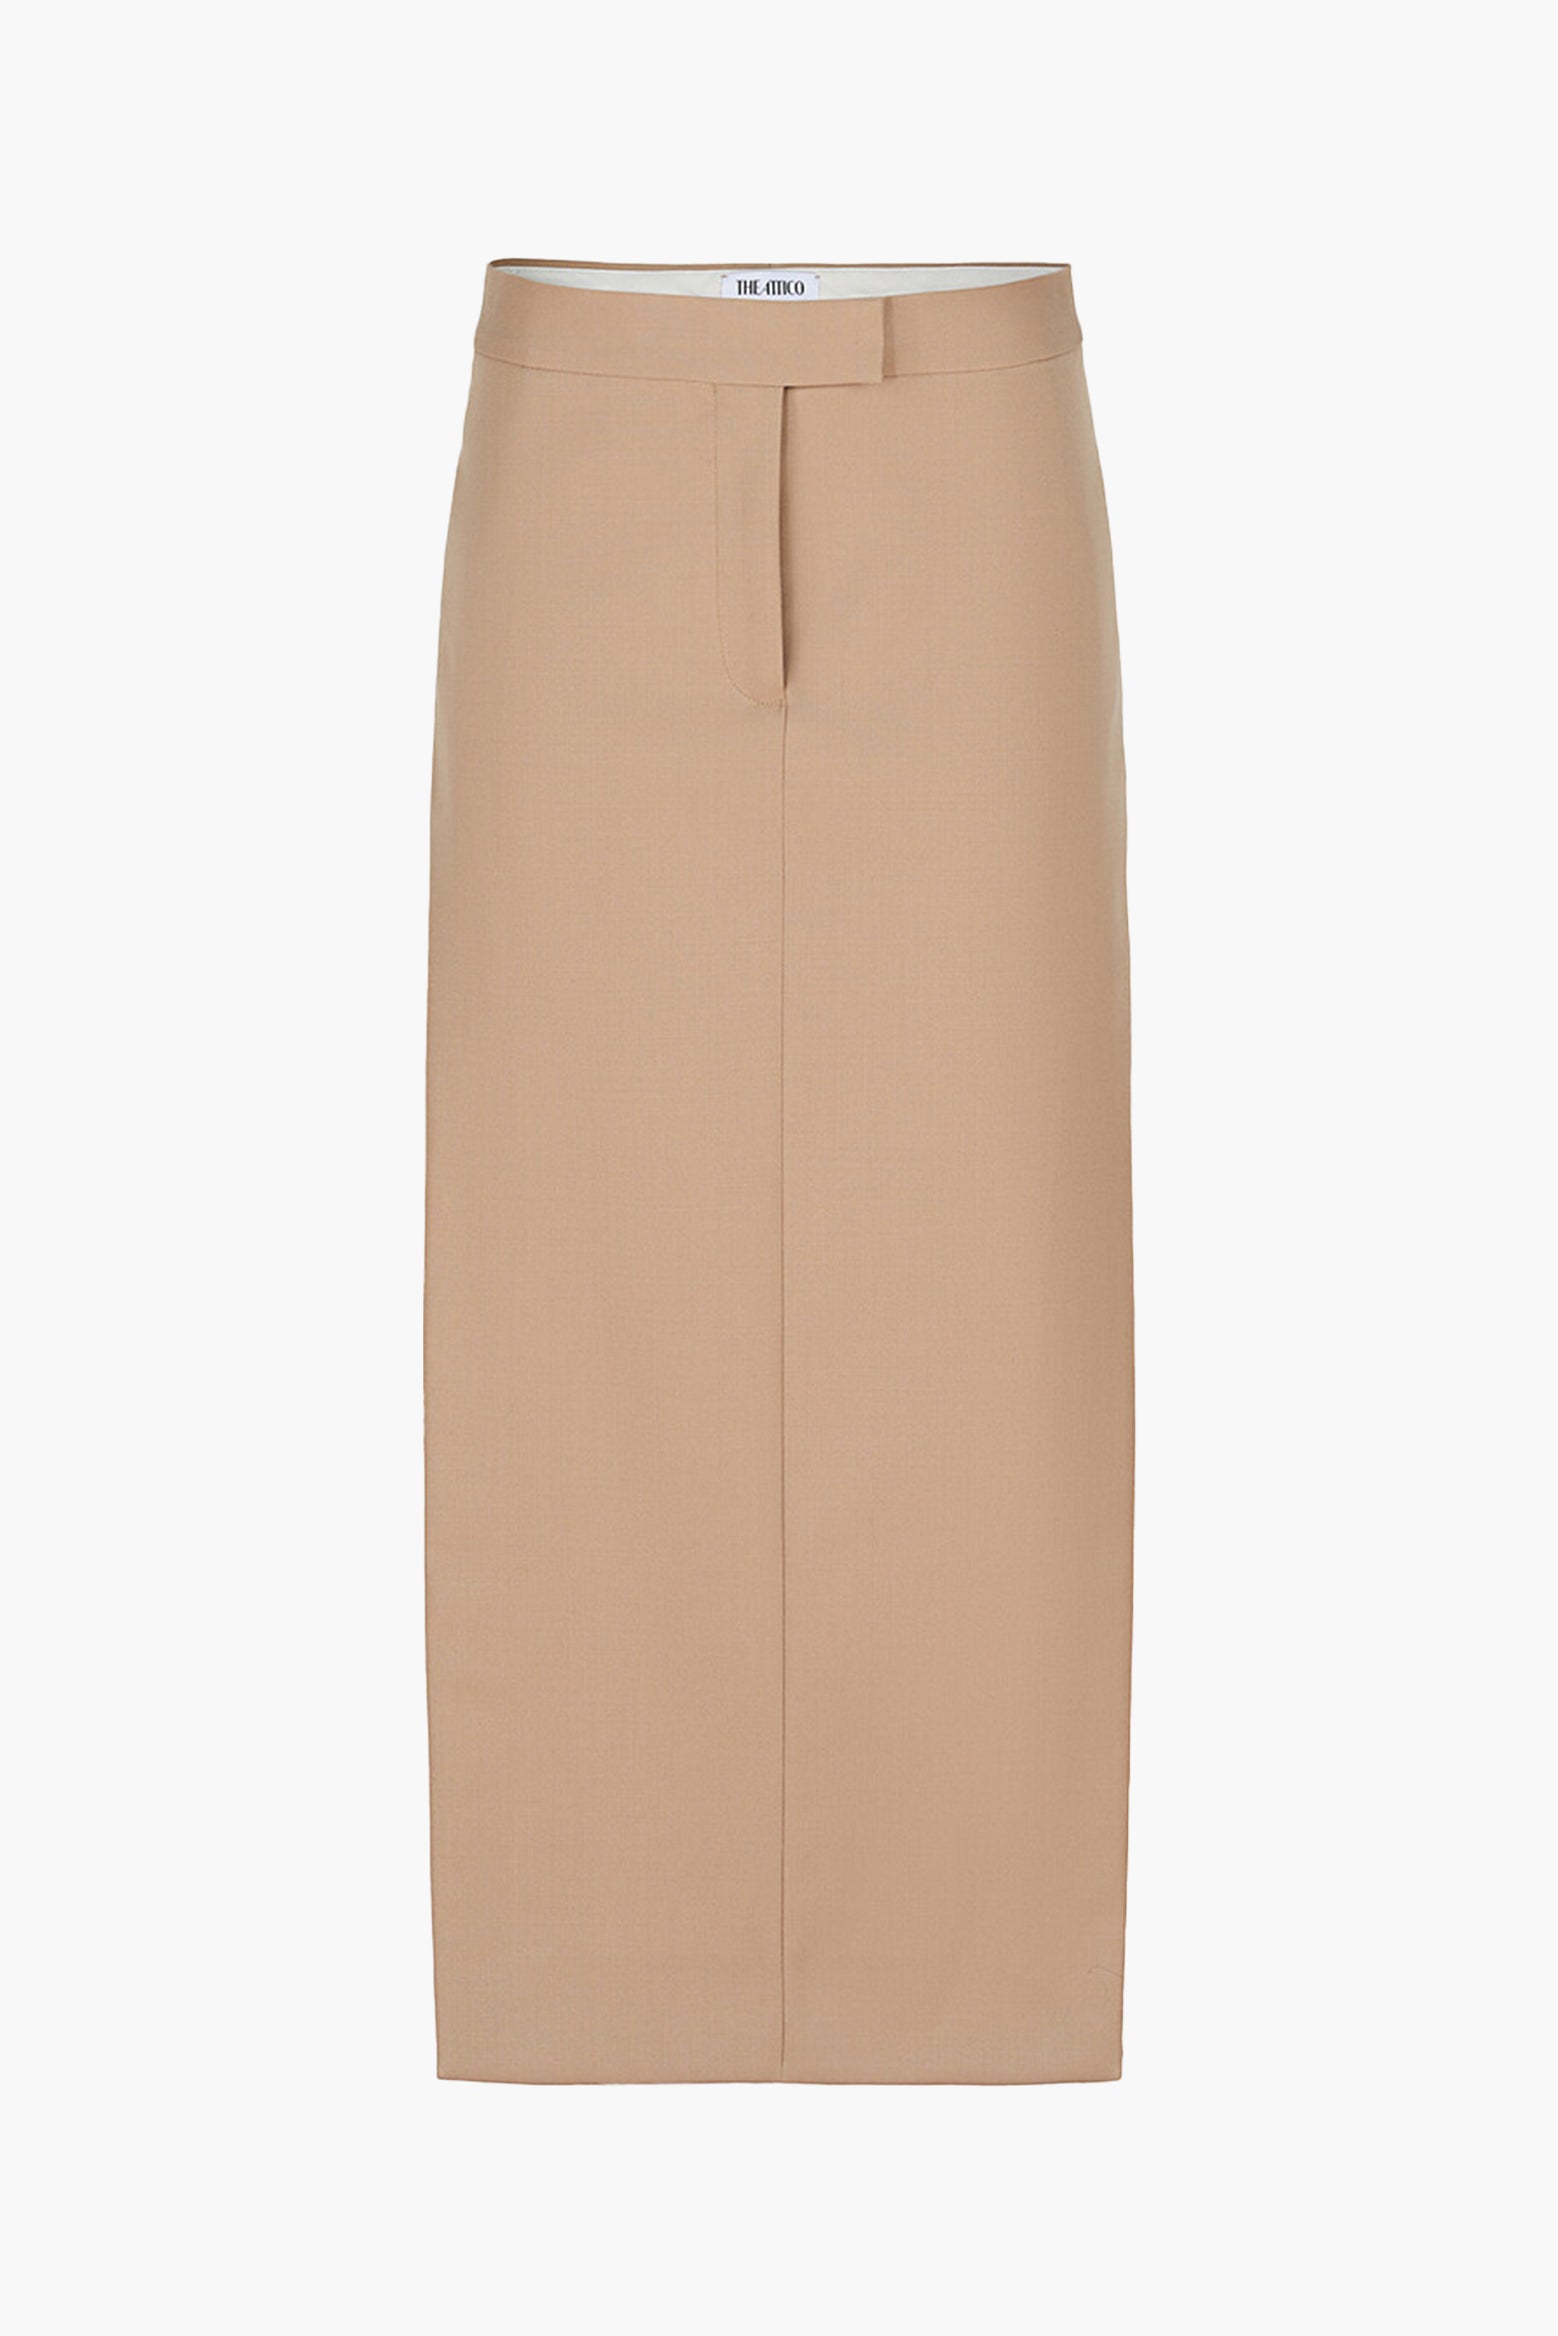 The Attico Midi Skirt in Beige available at The New Trend Australia.